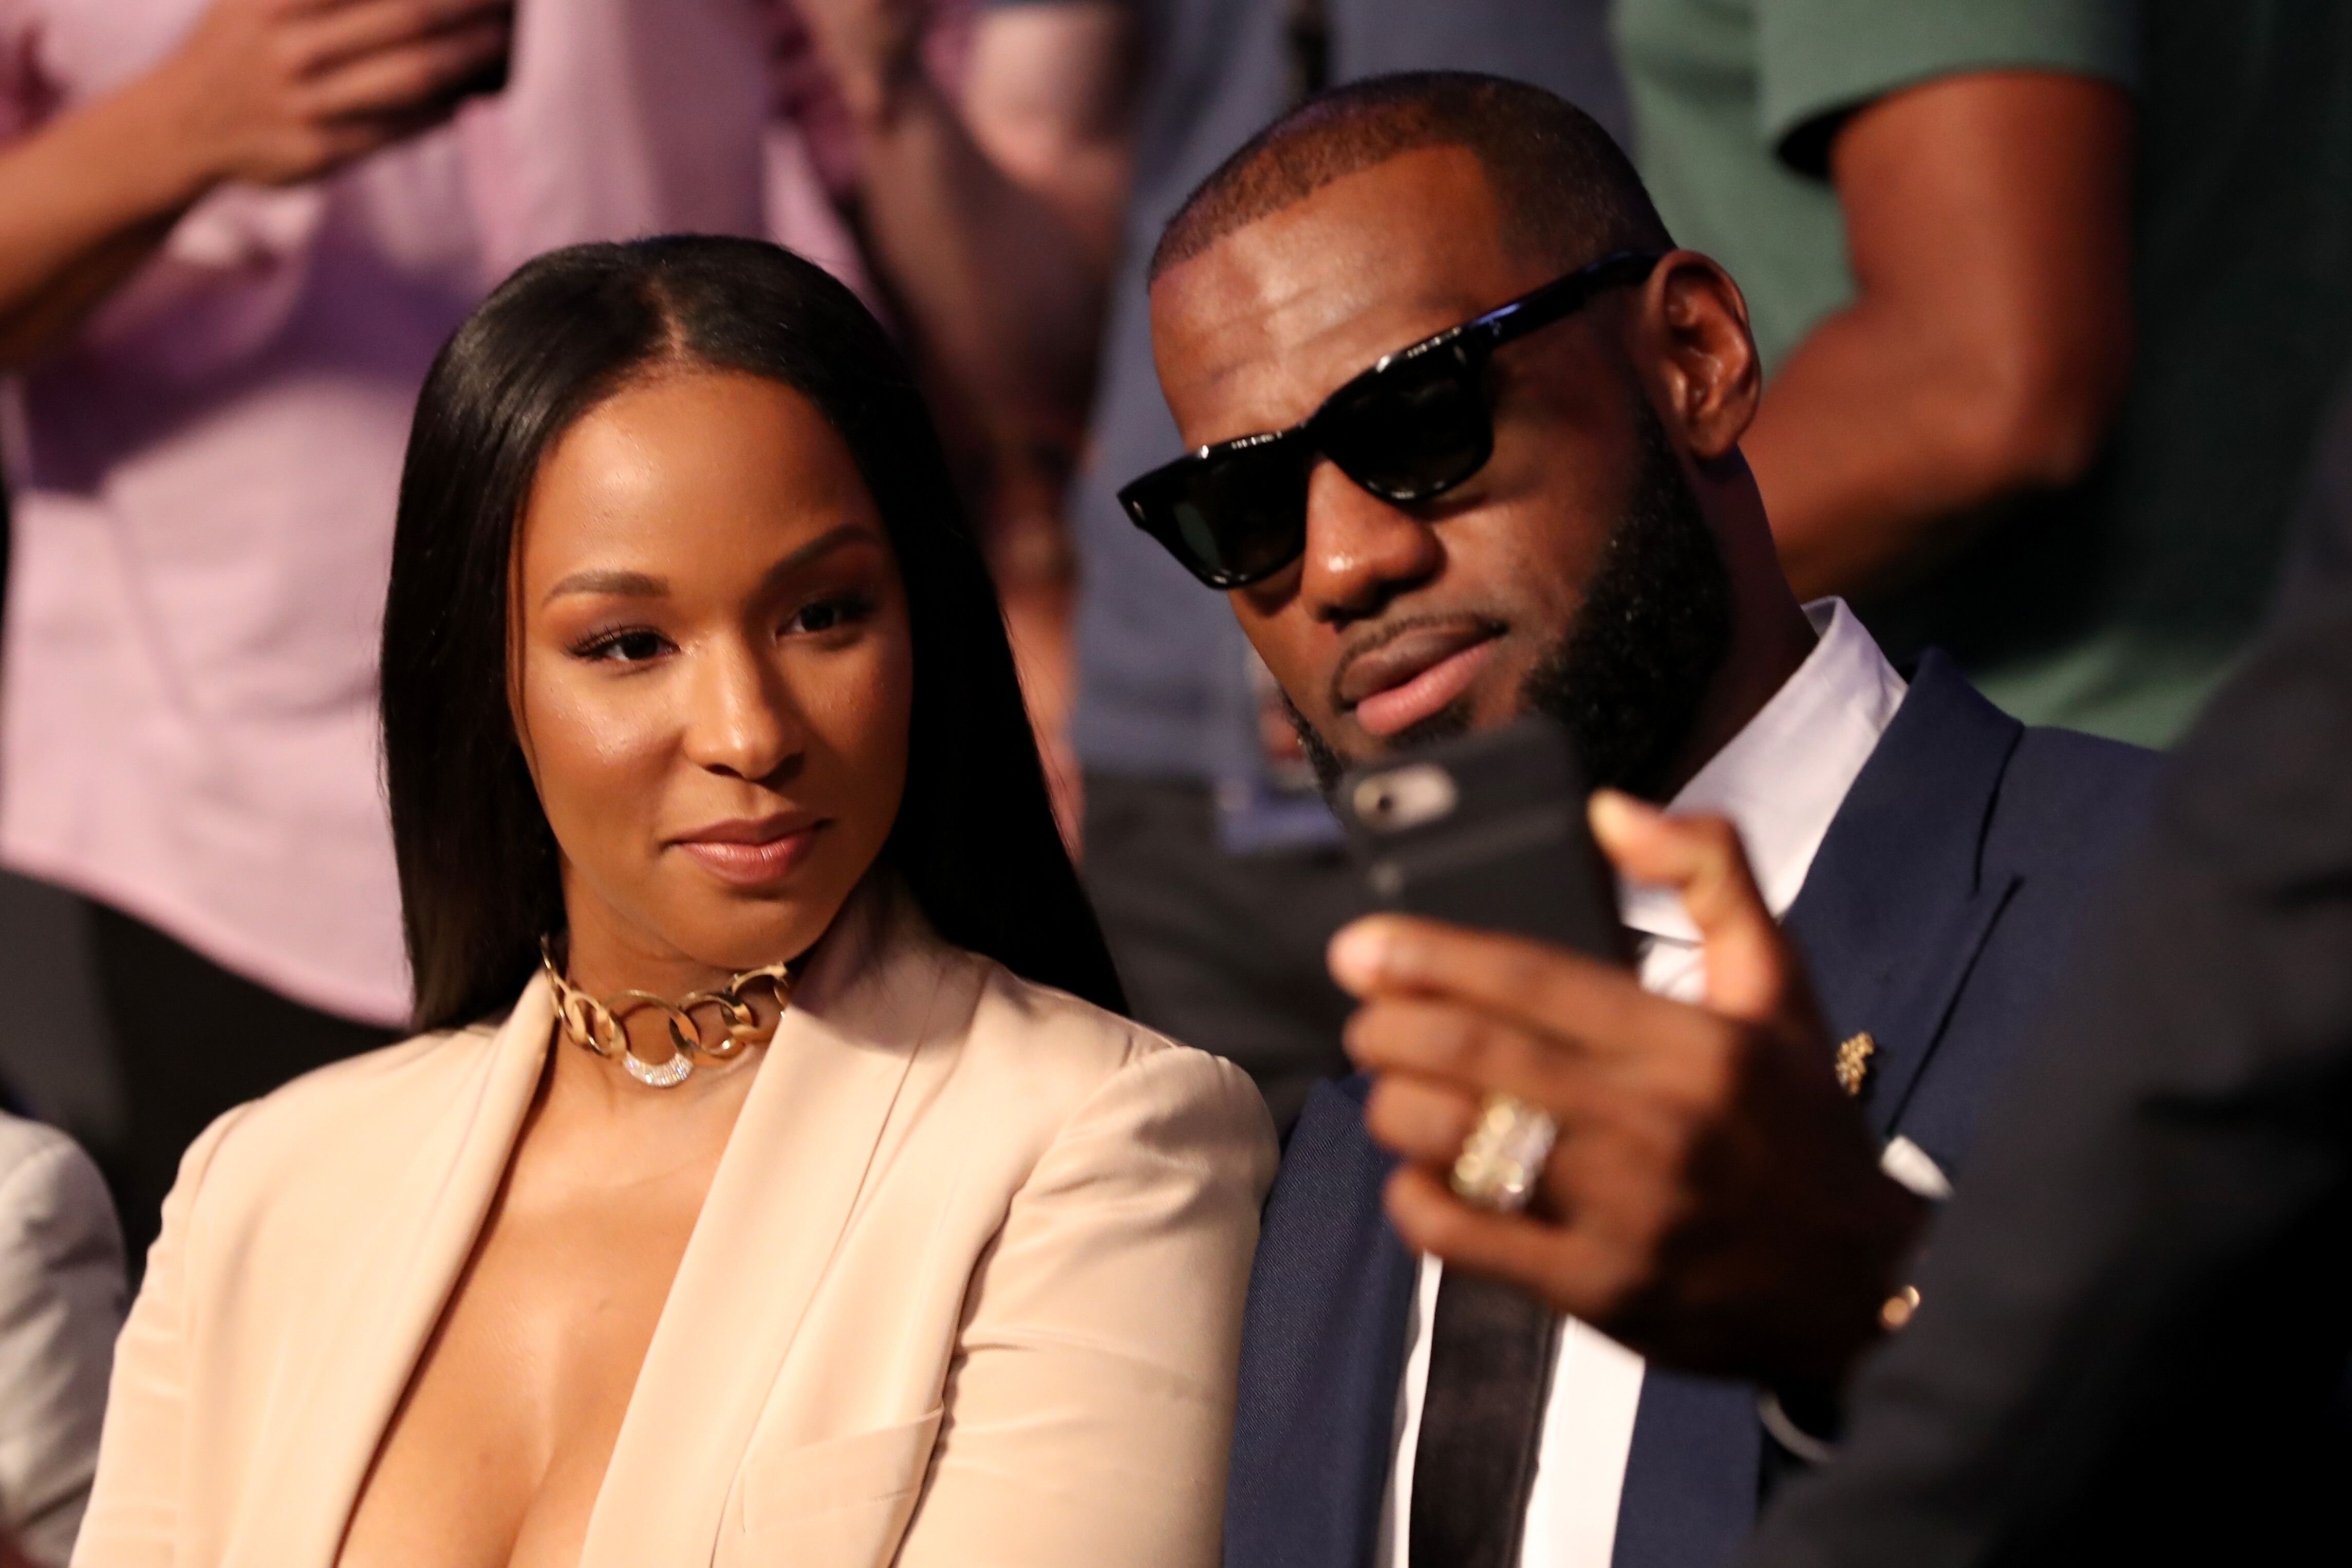 LeBron and Savannah James at Mayweather vs Mcgregor-fight/ Source: Getty Images